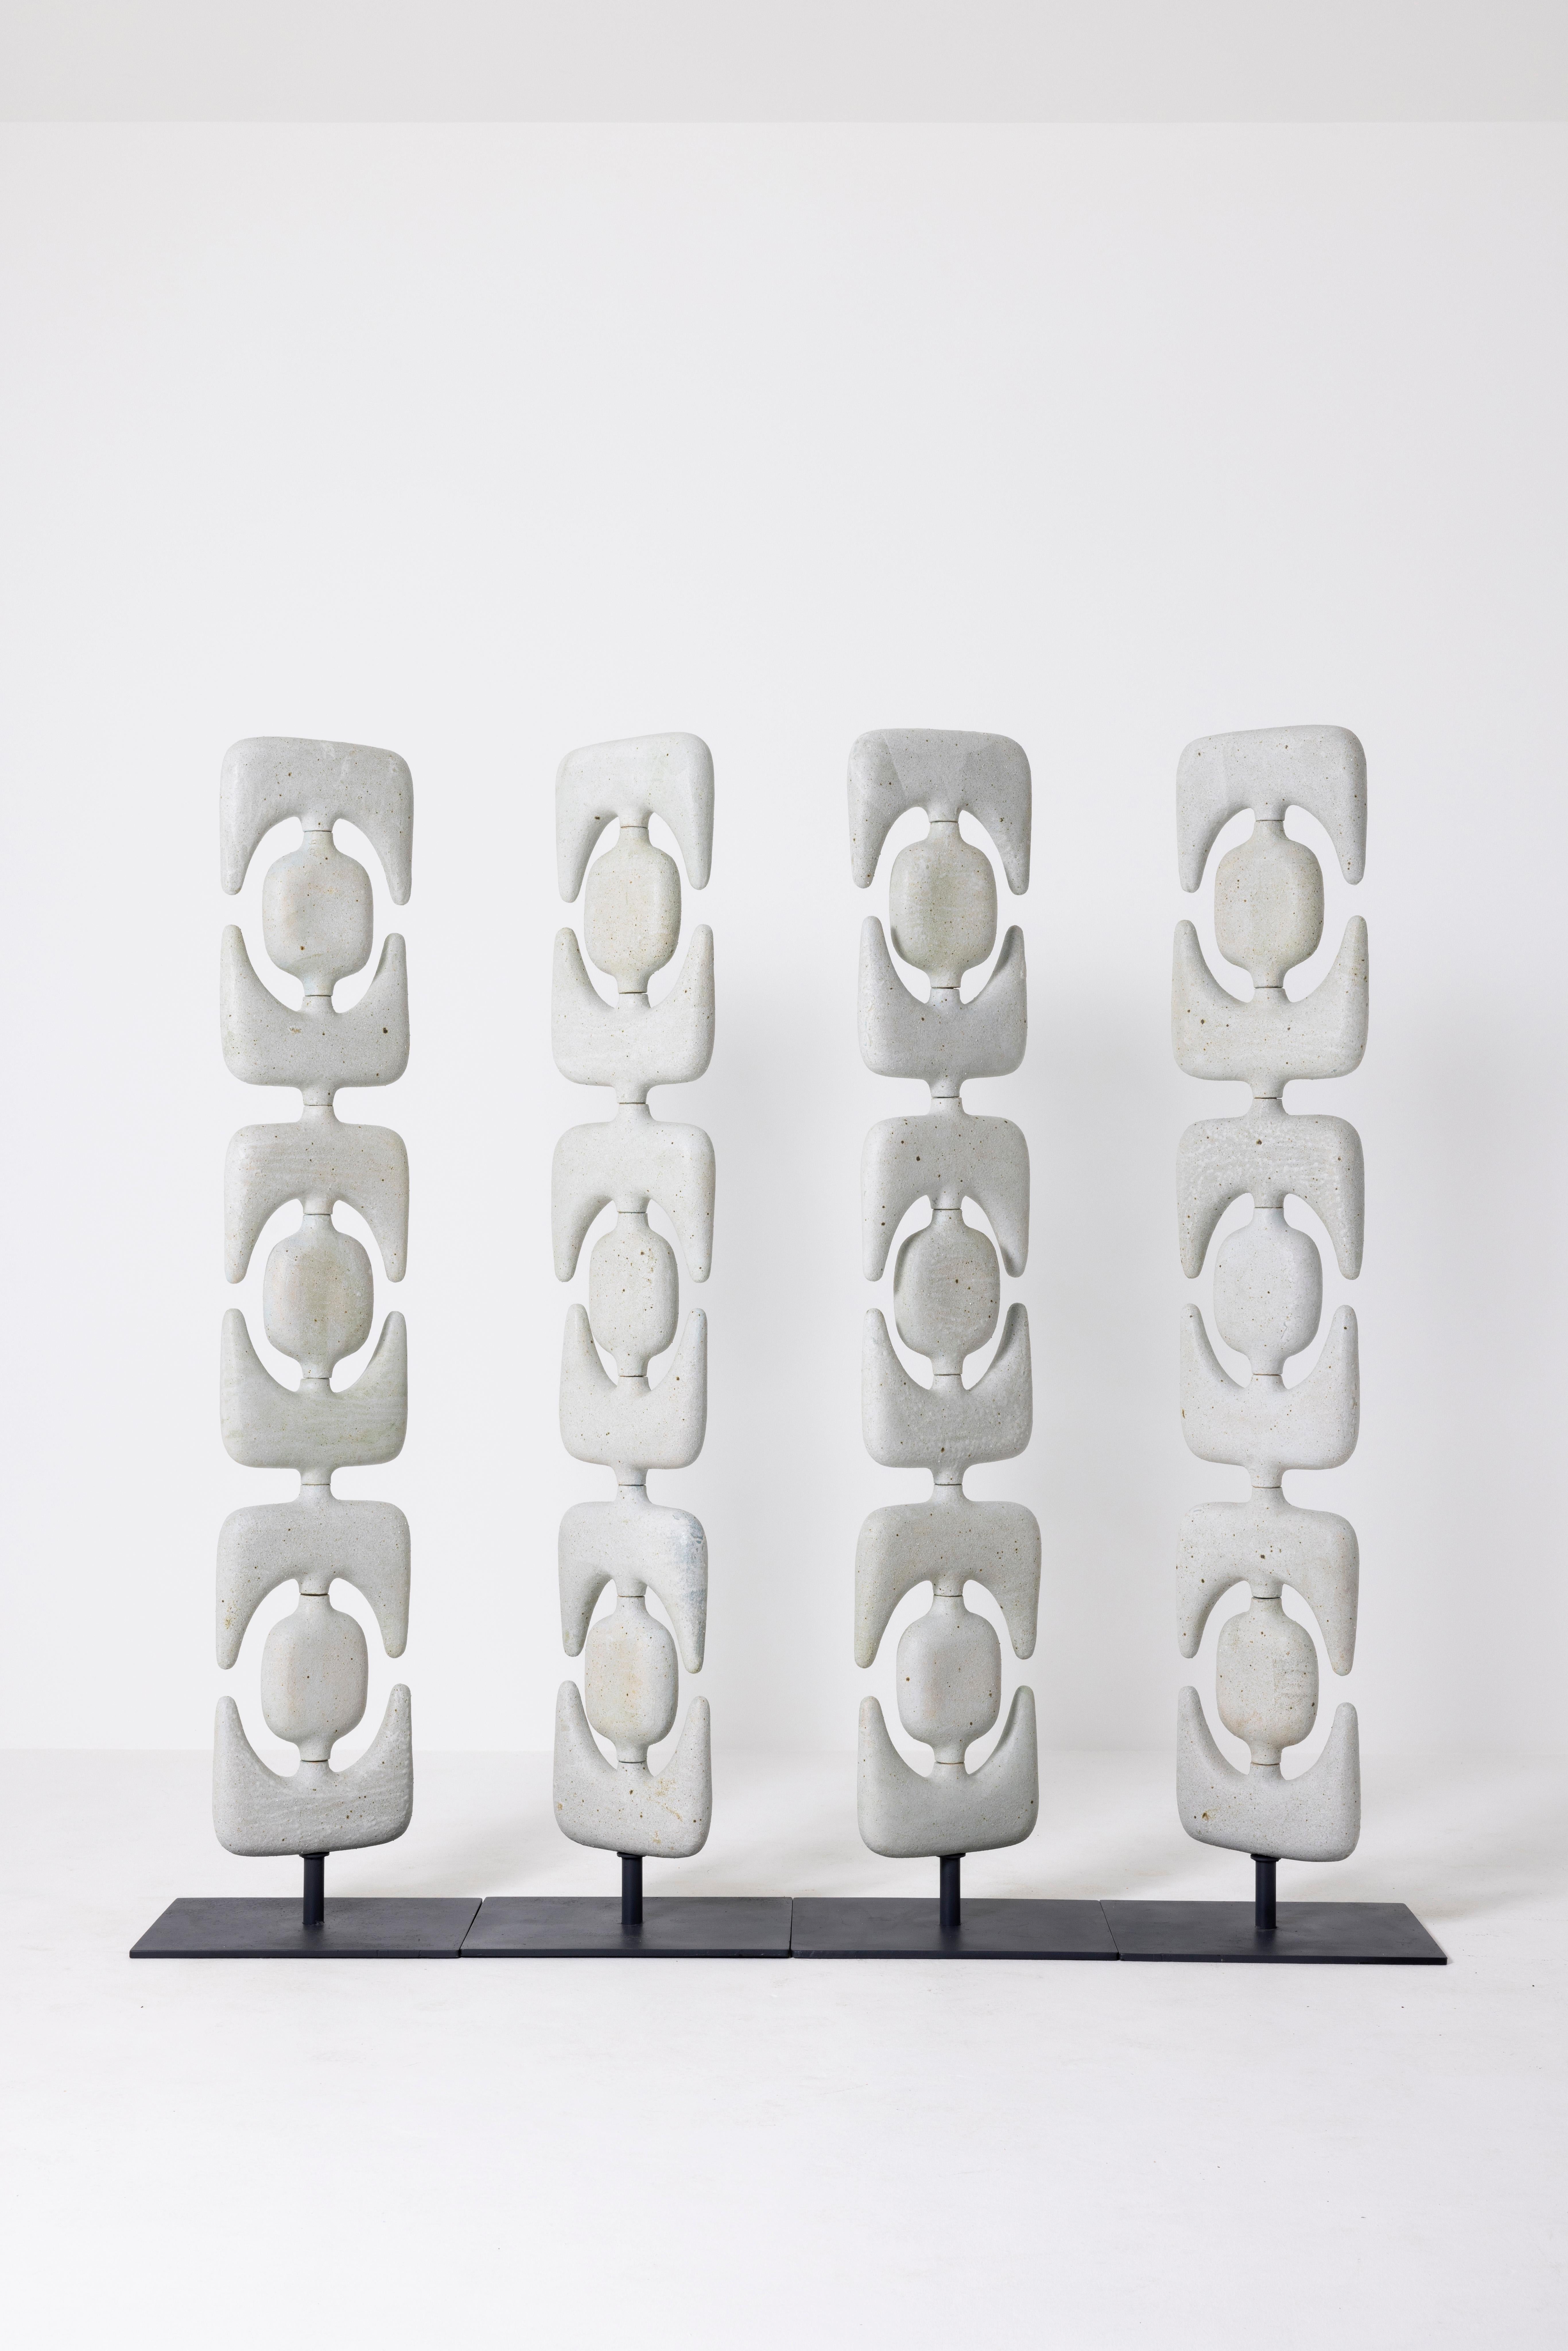 French Contemporary Room Divider / Screen Totem Sculptures For Sale